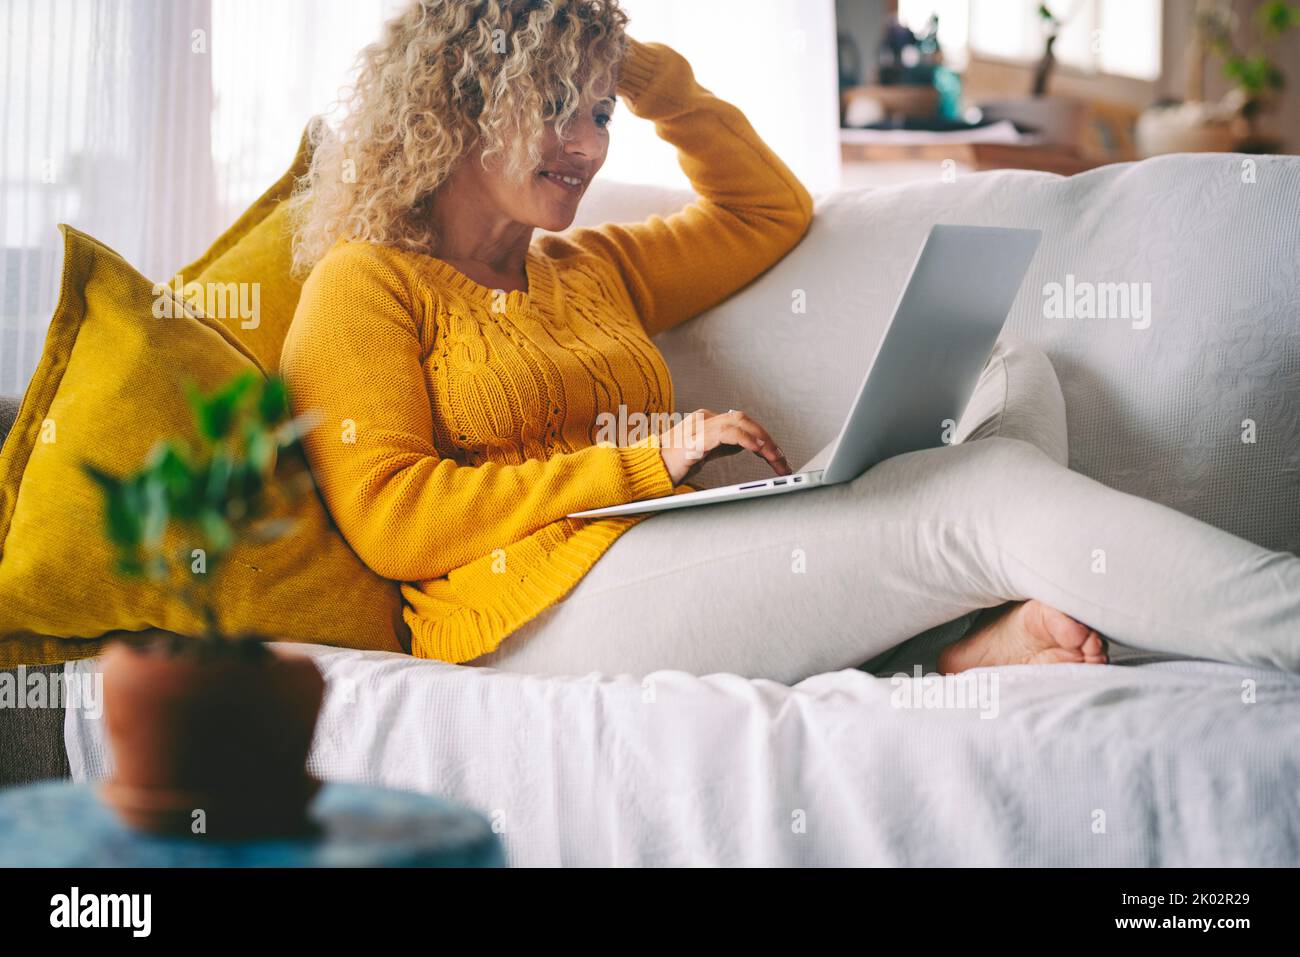 Adult woman in indoor home technology leisure activity using laptop computer to surf the web and smile. Online job business work. Happy female people in video call connection Stock Photo